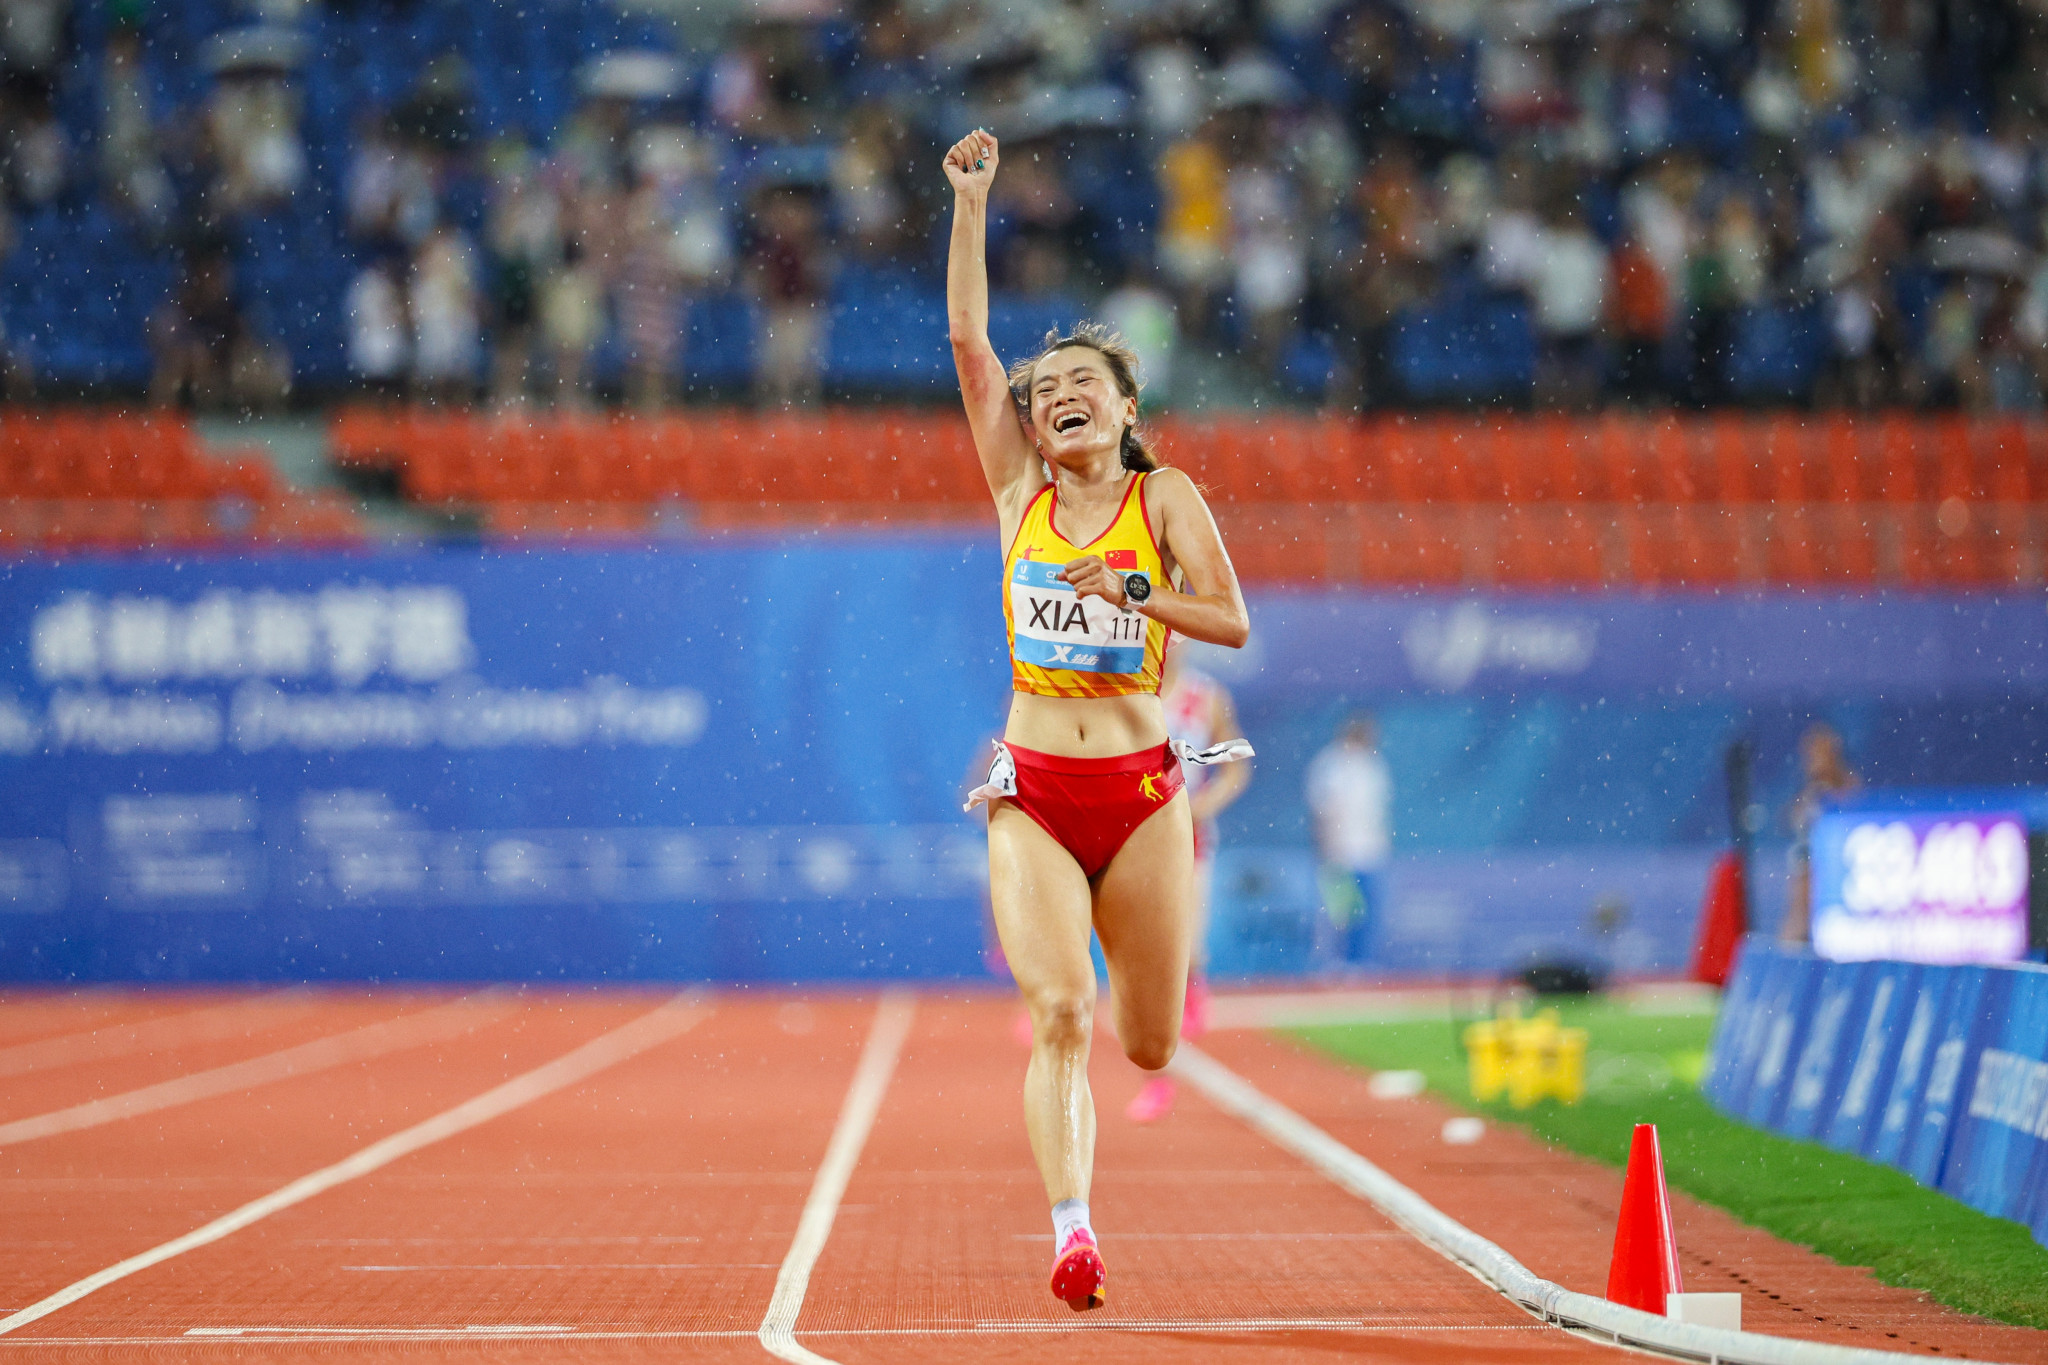 Xia Yuyu of China celebrates after crossing the finish line to win the women's 10,000m crown ©Chengdu 2021